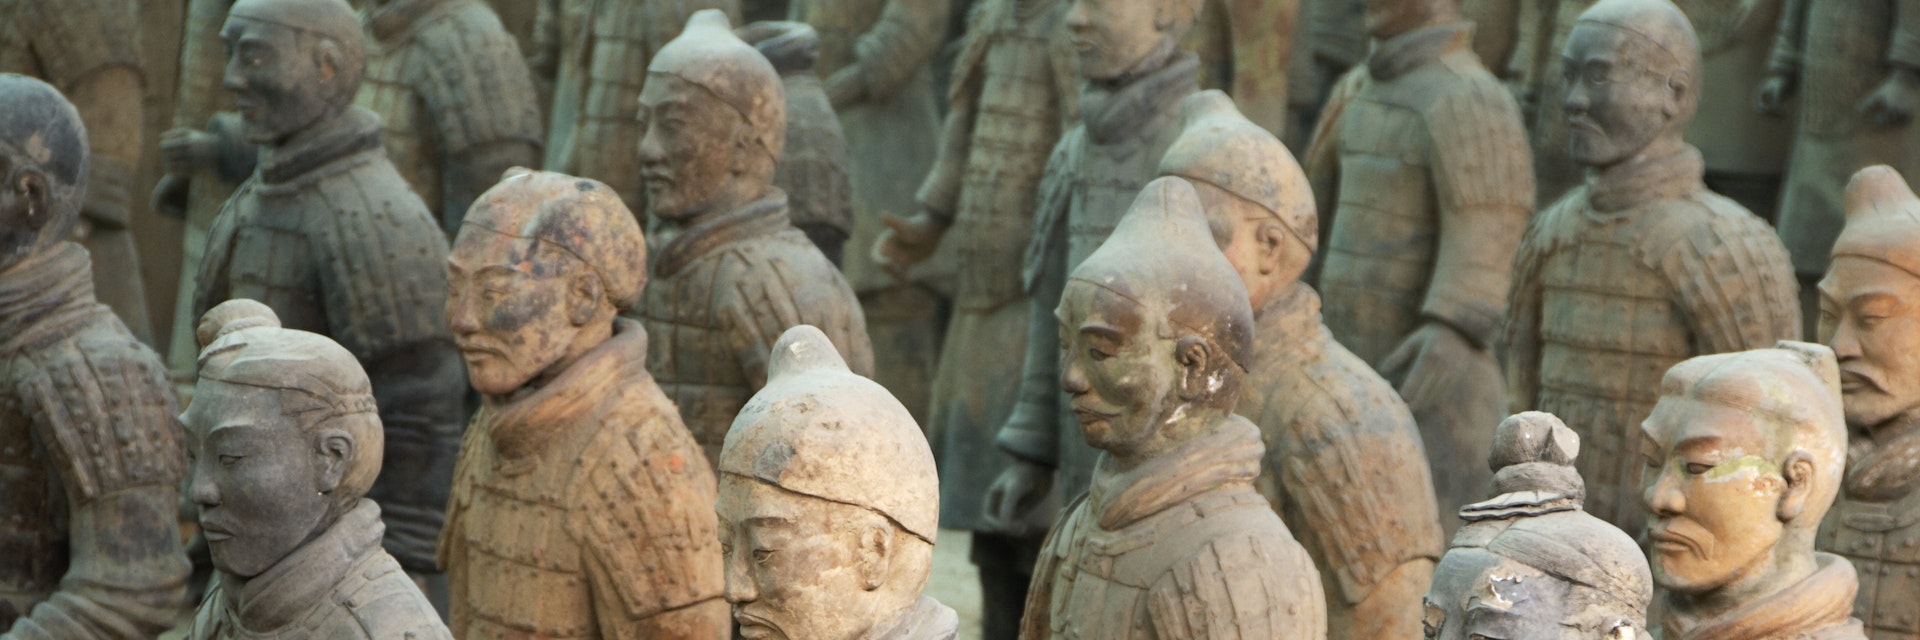 Subterranean life-size terracotta soldiers in battle formation - part of 2000 year old Army of Terracotta Warriors (Bingmayong).